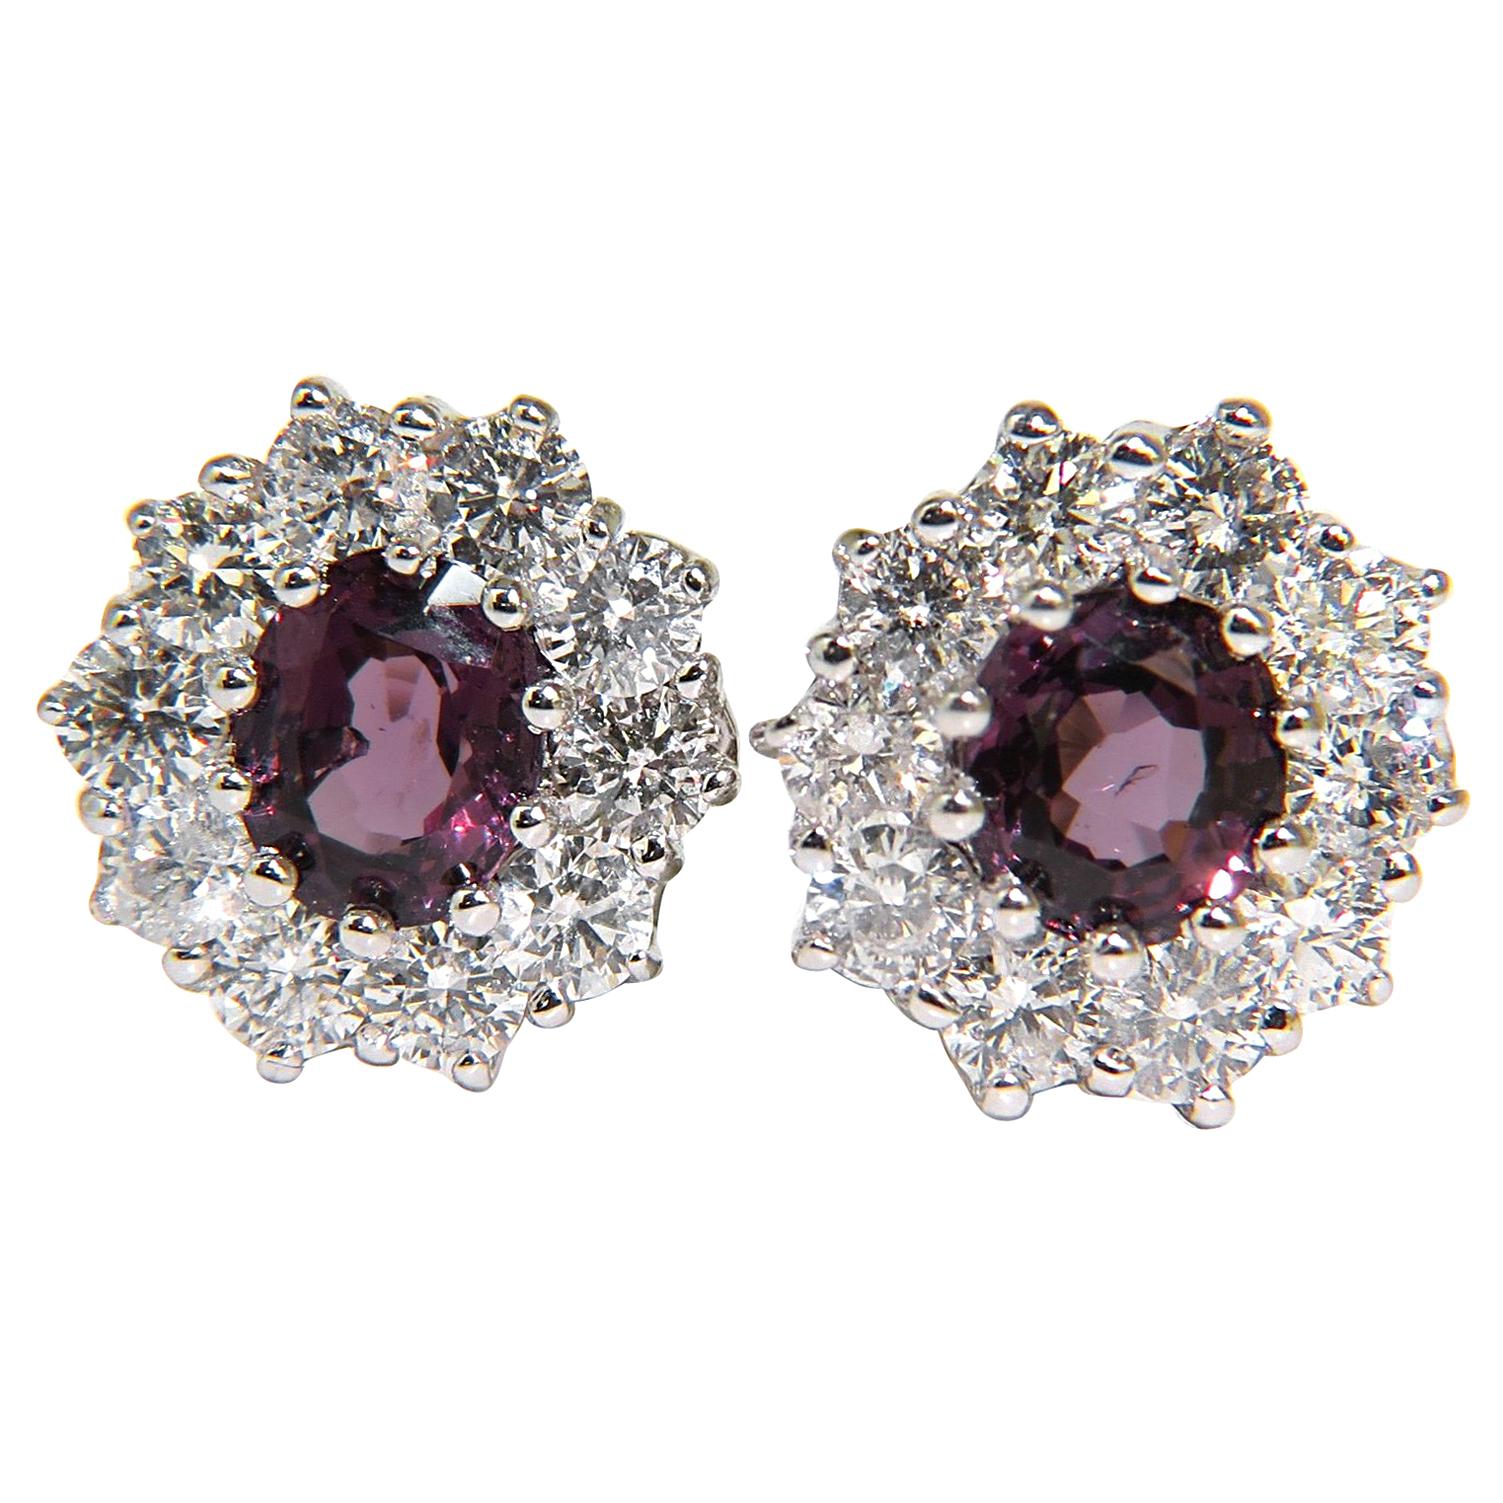 14 Karat 3.36 Carat Natural Purple Spinel Diamond Cluster Earrings and Omega For Sale